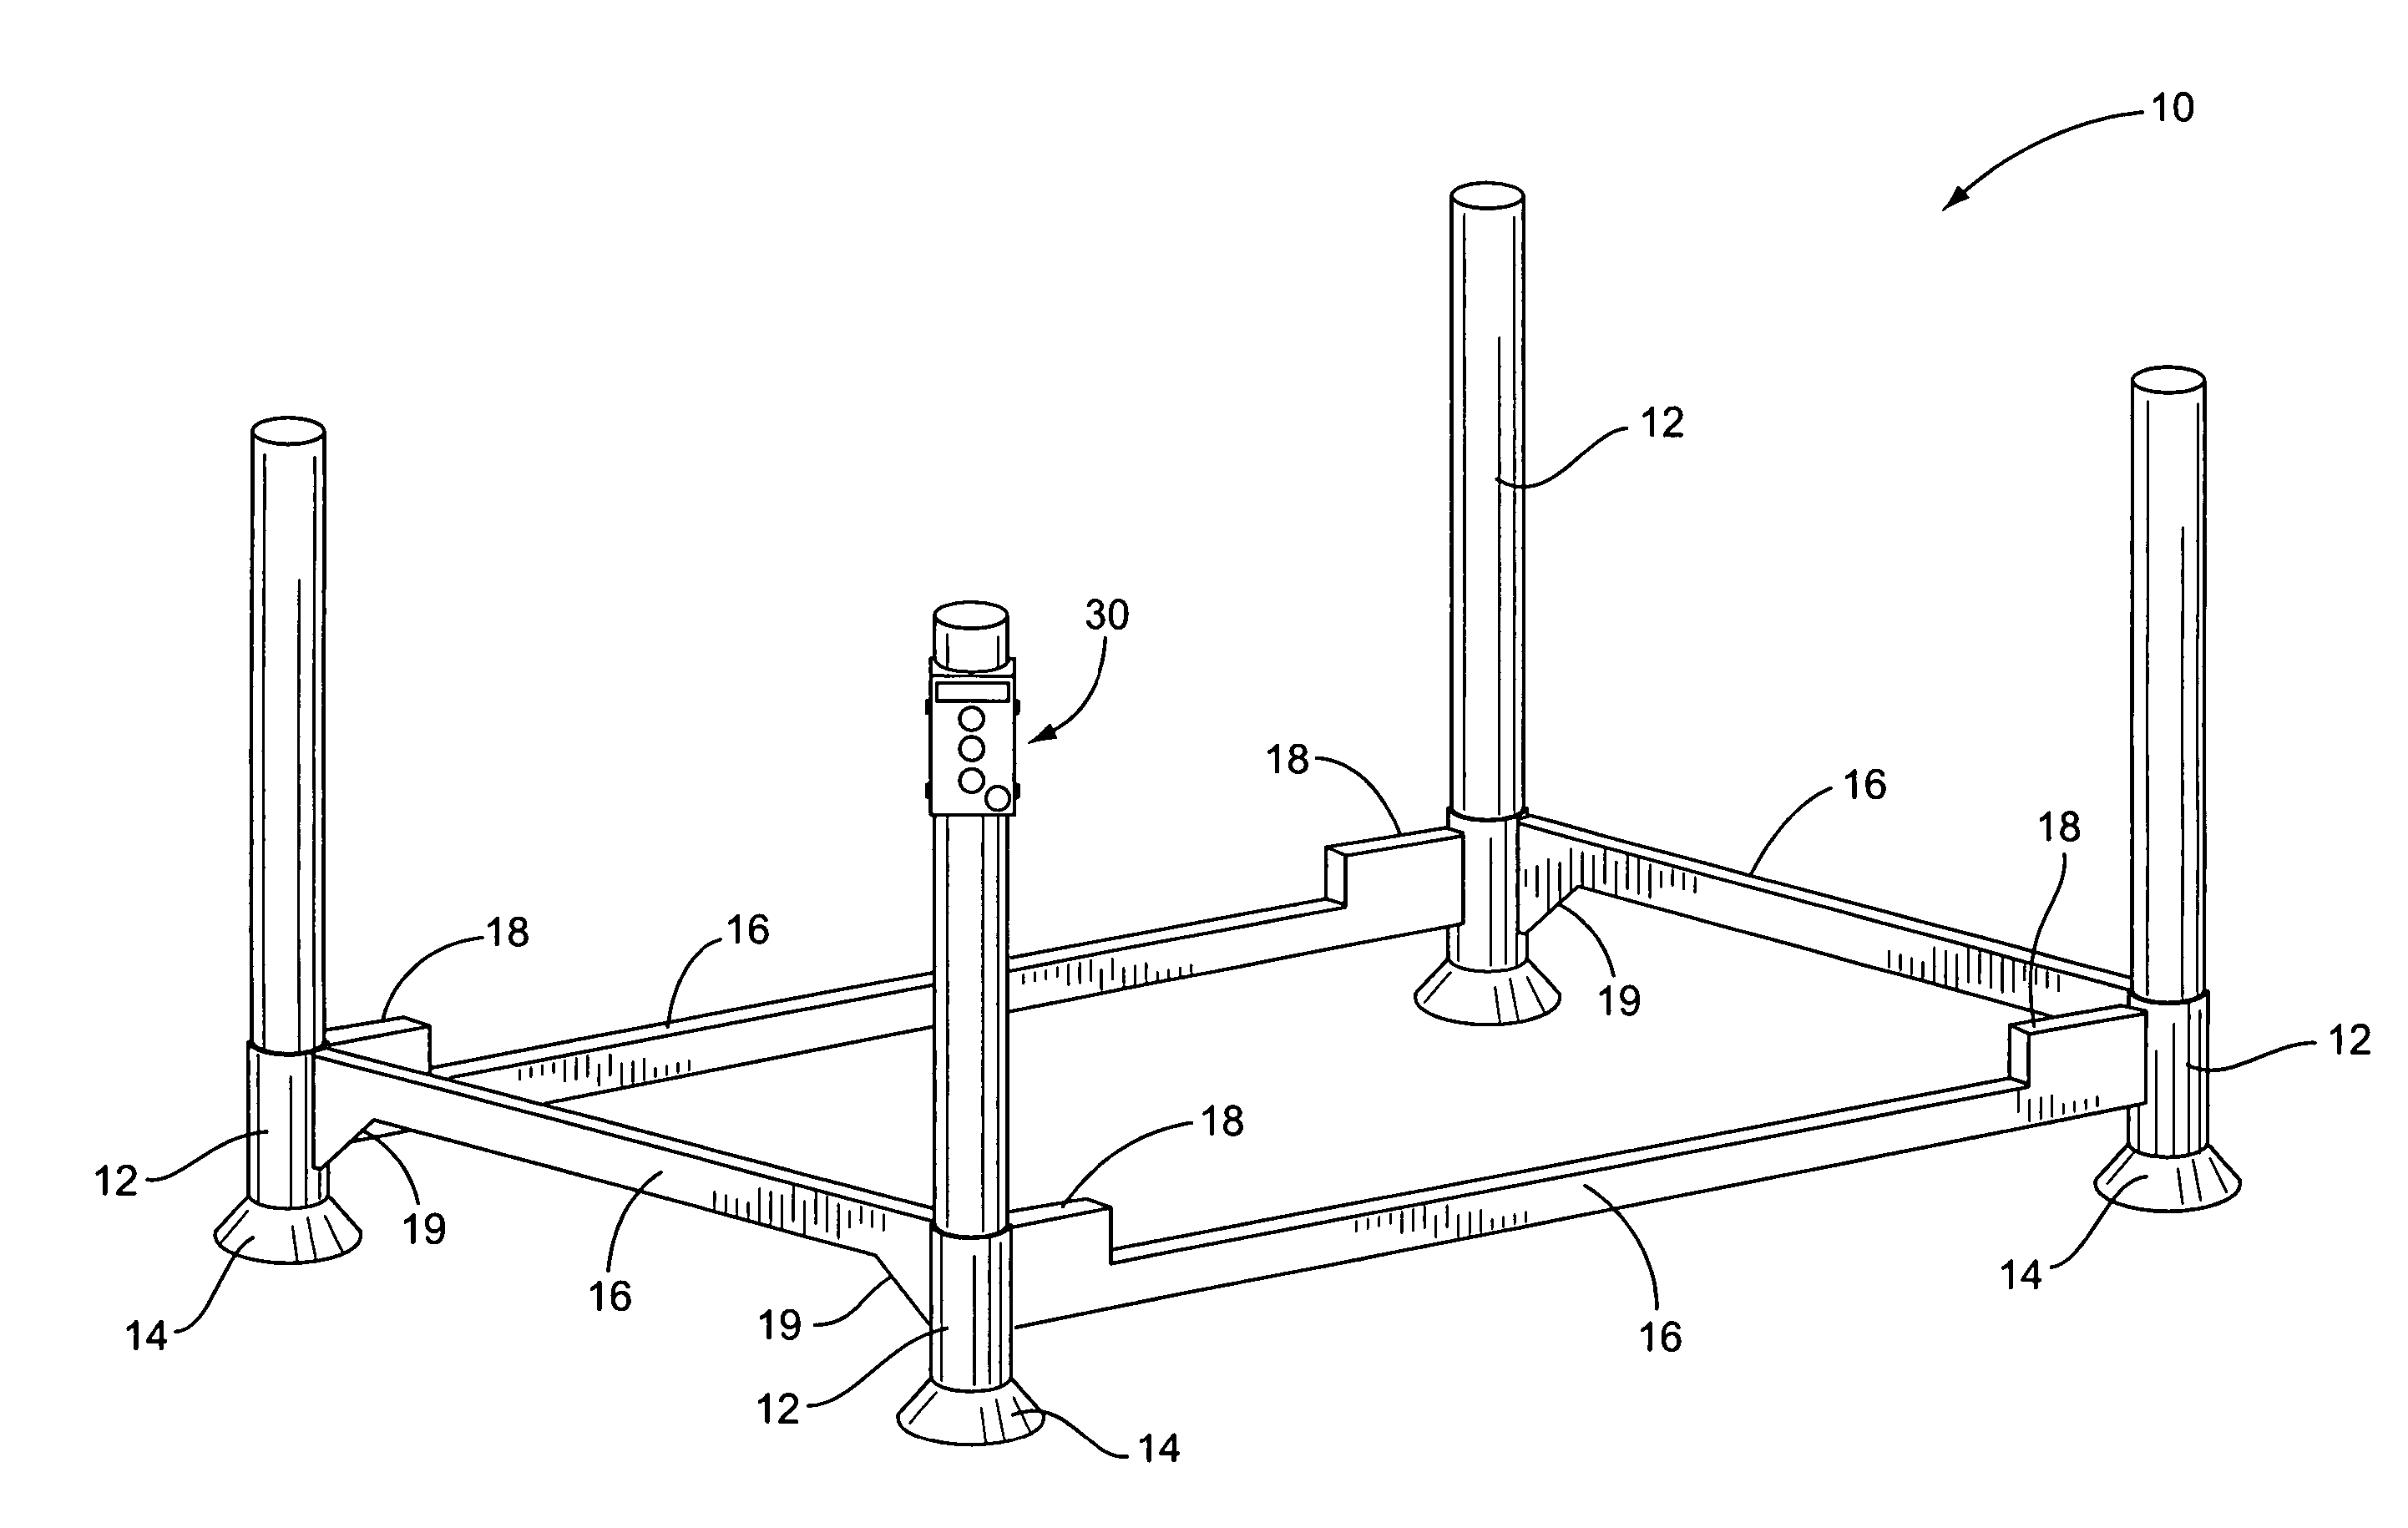 Intelligent reader system and method for identifying and tracking goods and materials transported in pallets, including but not limited to scaffolding materials